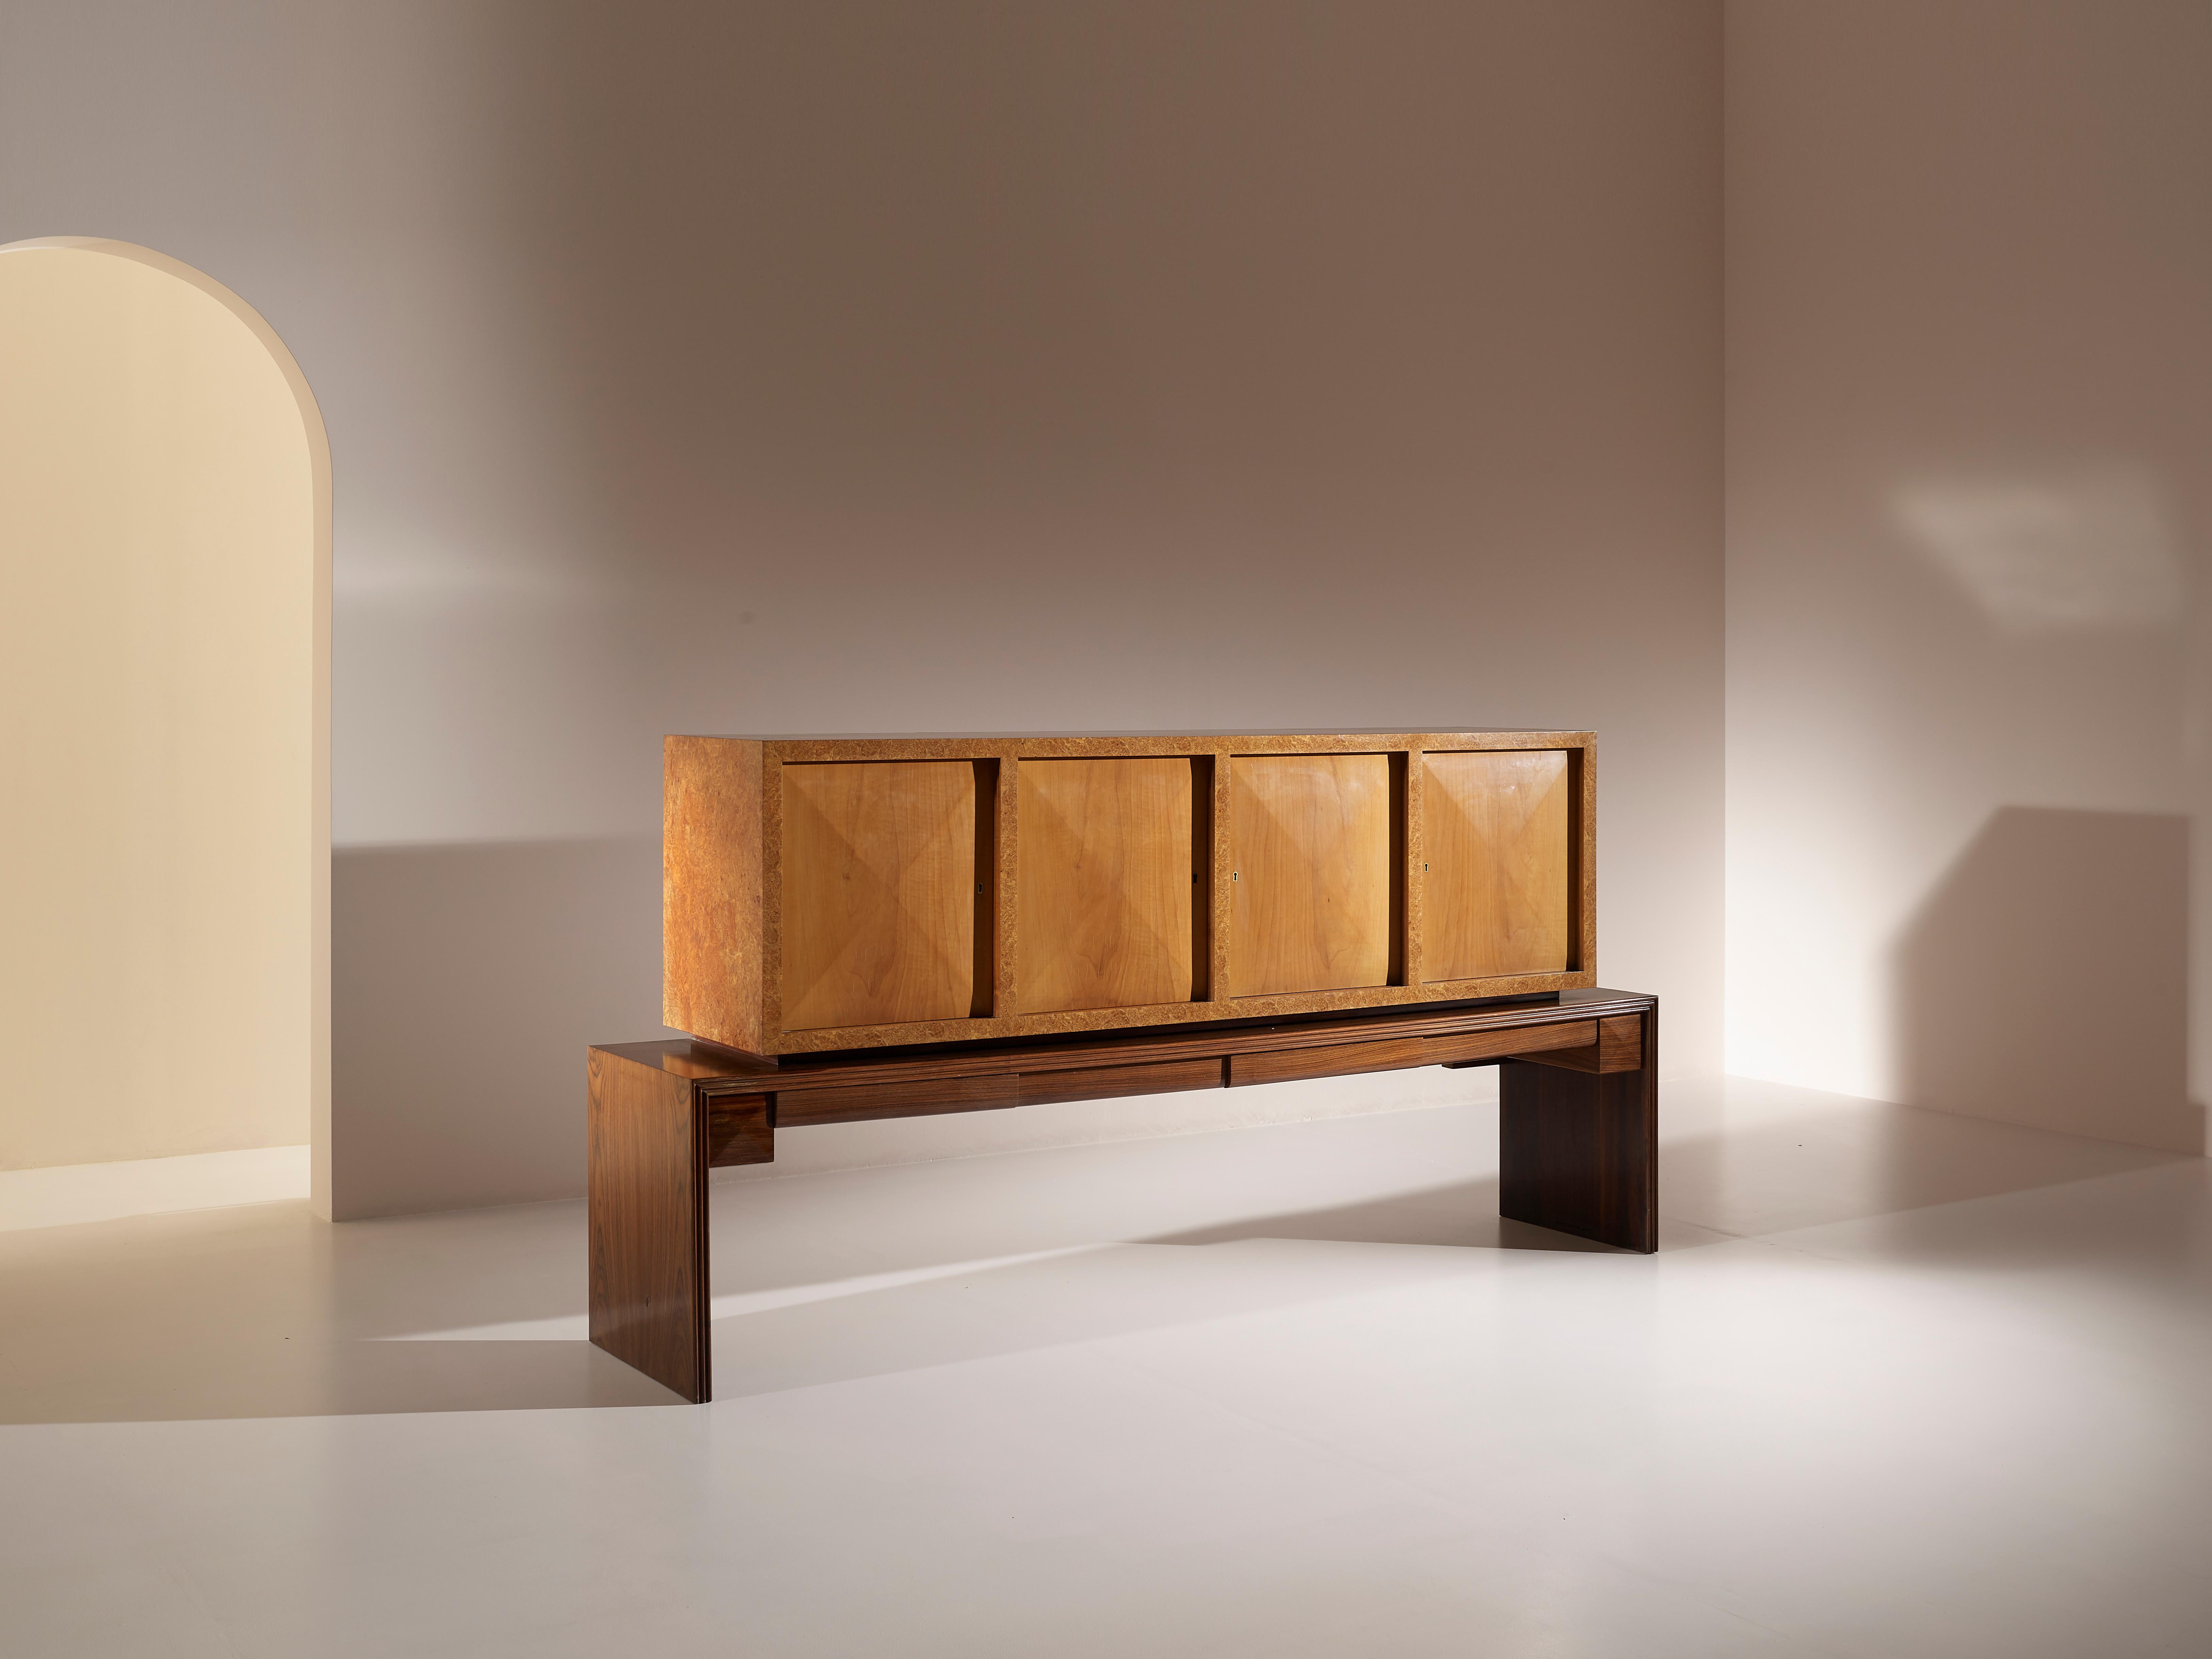 An eclectic but classic sideboard cabinet designed in the 1960s by Alberto Salvati and Ambrogio Tresoldi and produced in Lissone (Milan) for a private commission. This unique credenza is part of an entire dining room set comprehensive of a cupboard